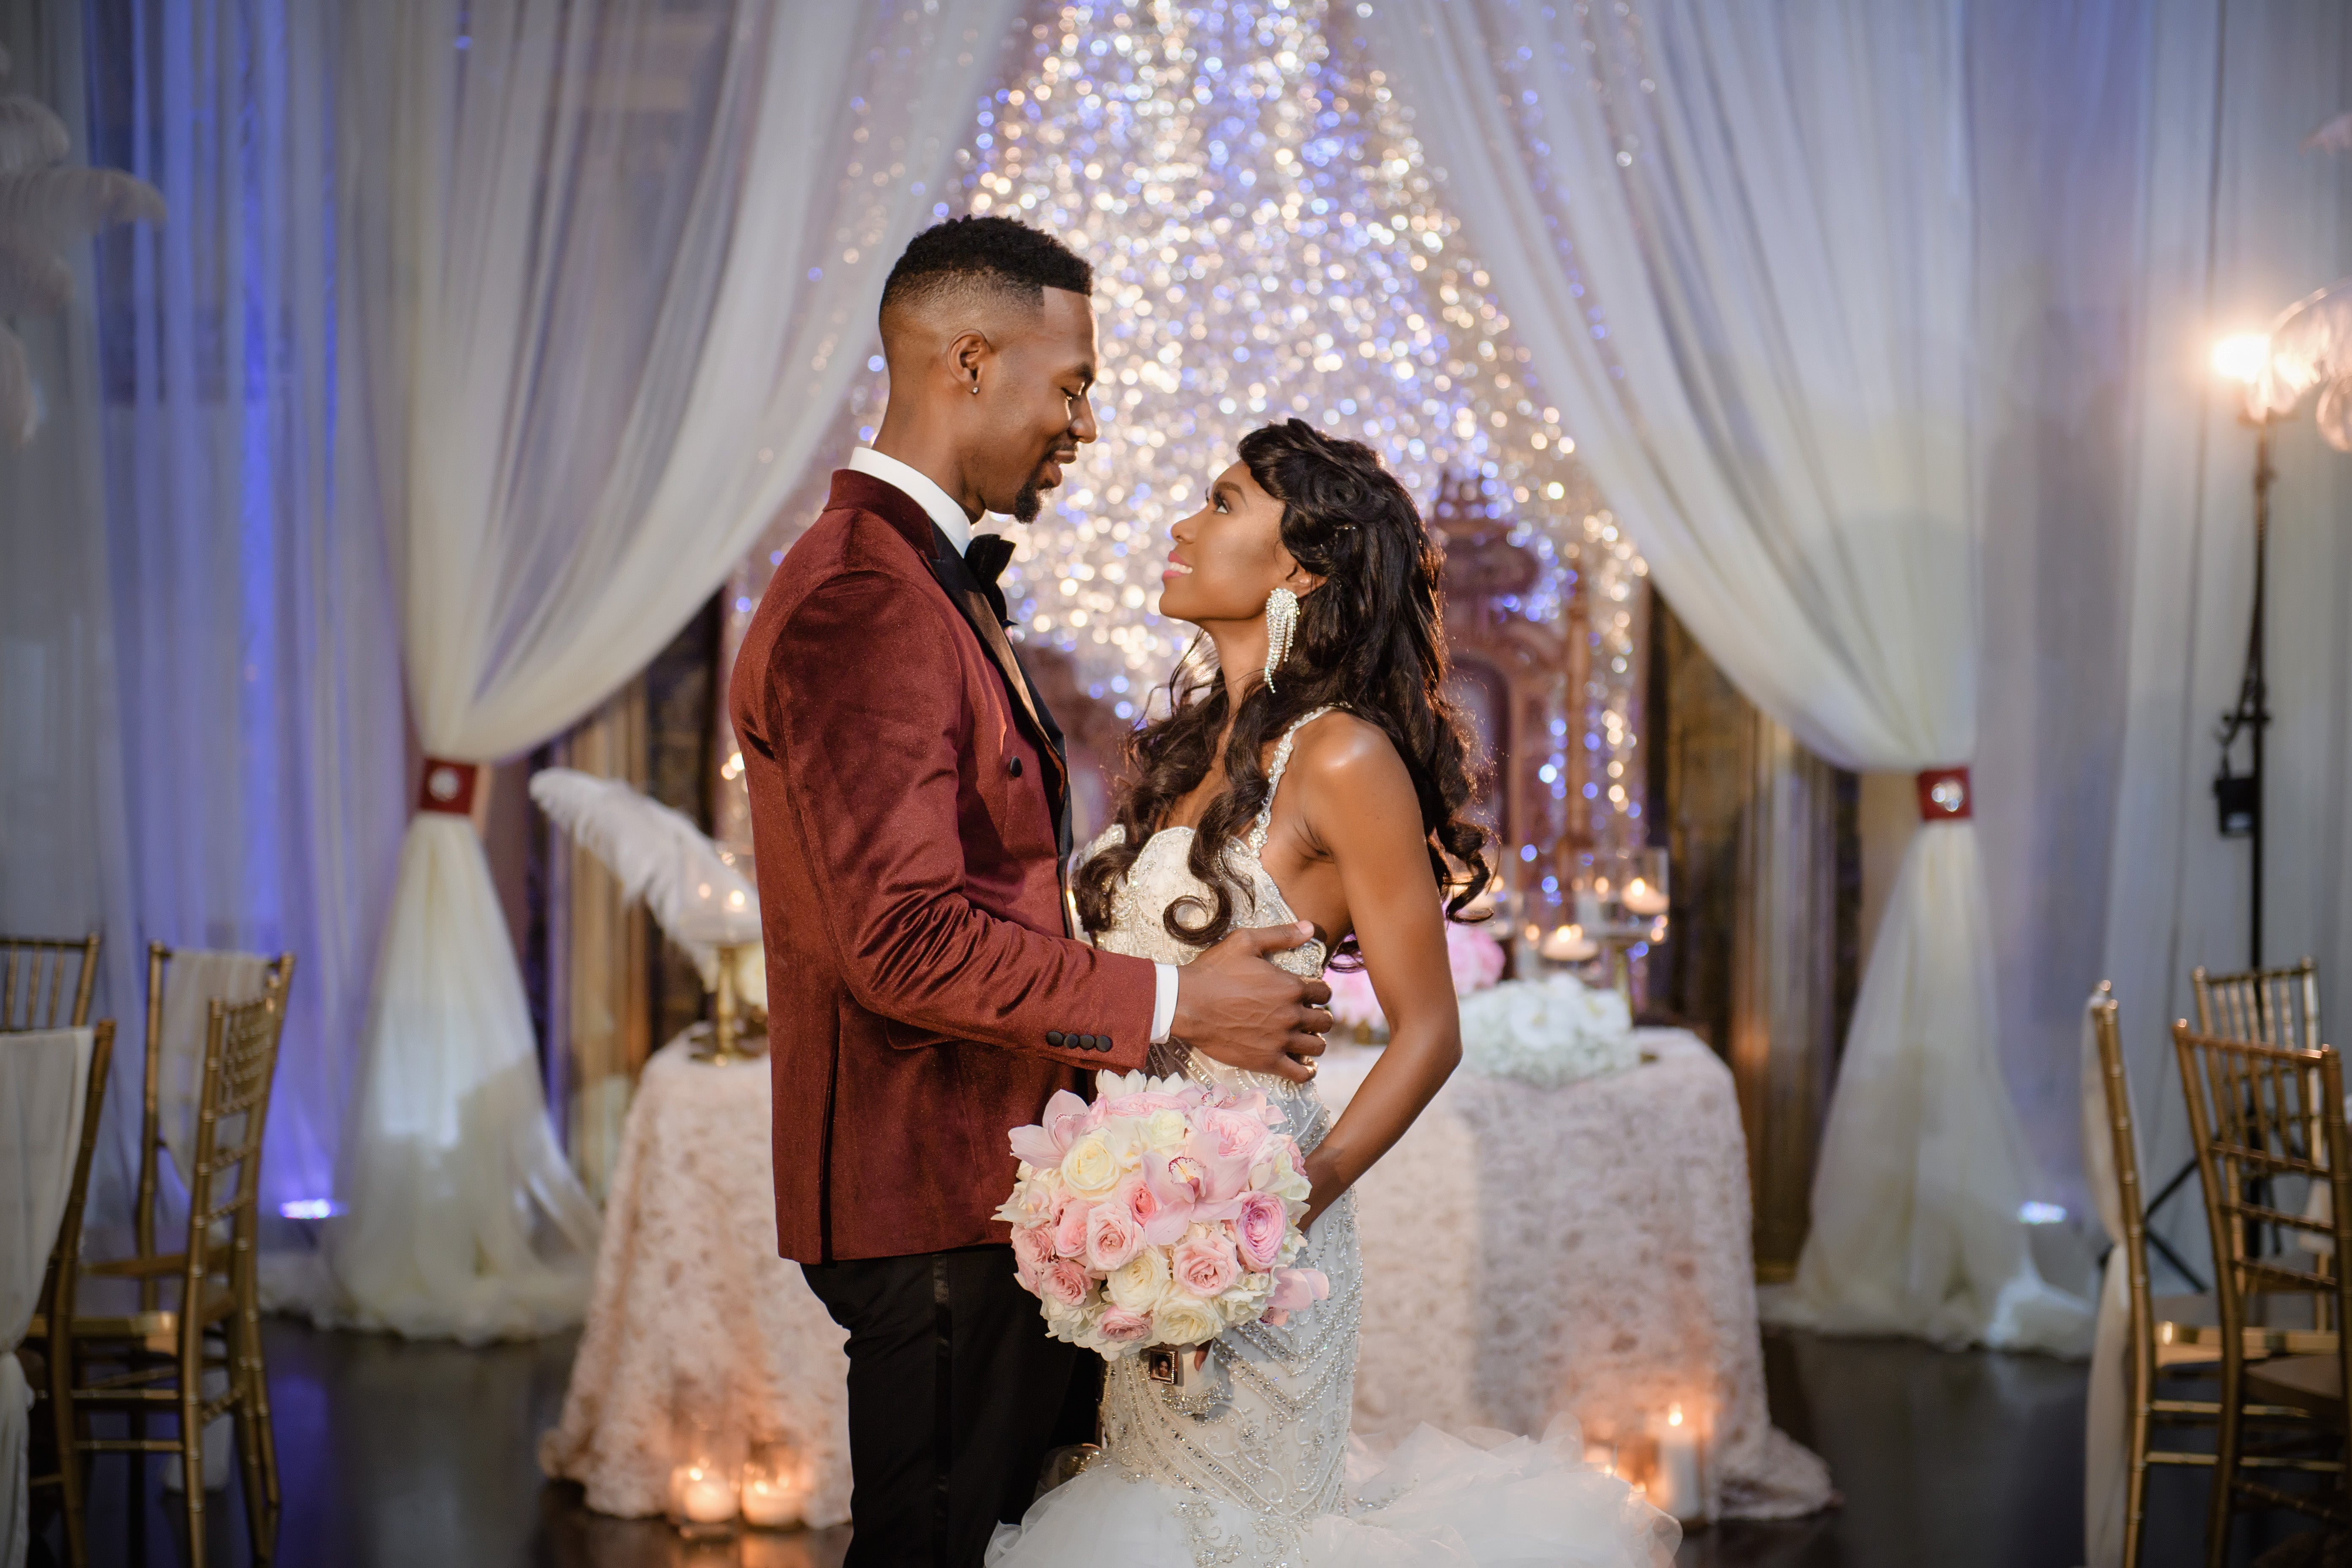 Bridal Bliss: Robin and Isaac’s Glam Wedding Was A Real Stunner